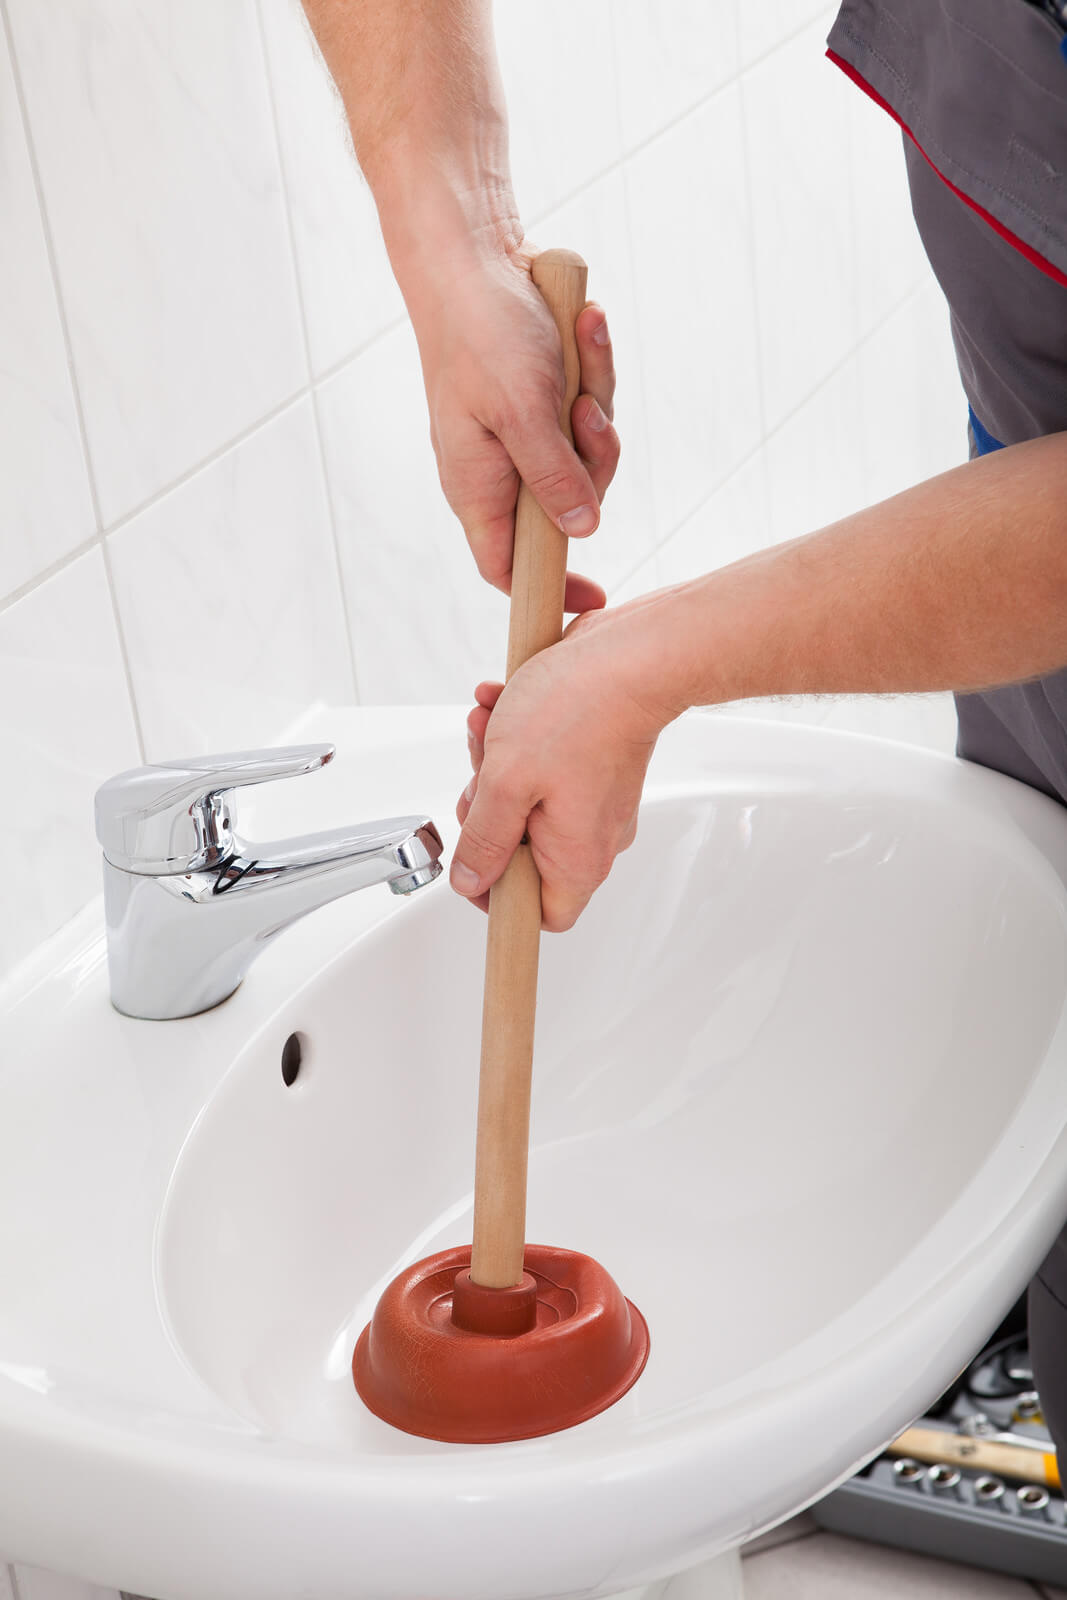 How to Safely Disinfect and Unclog Drains